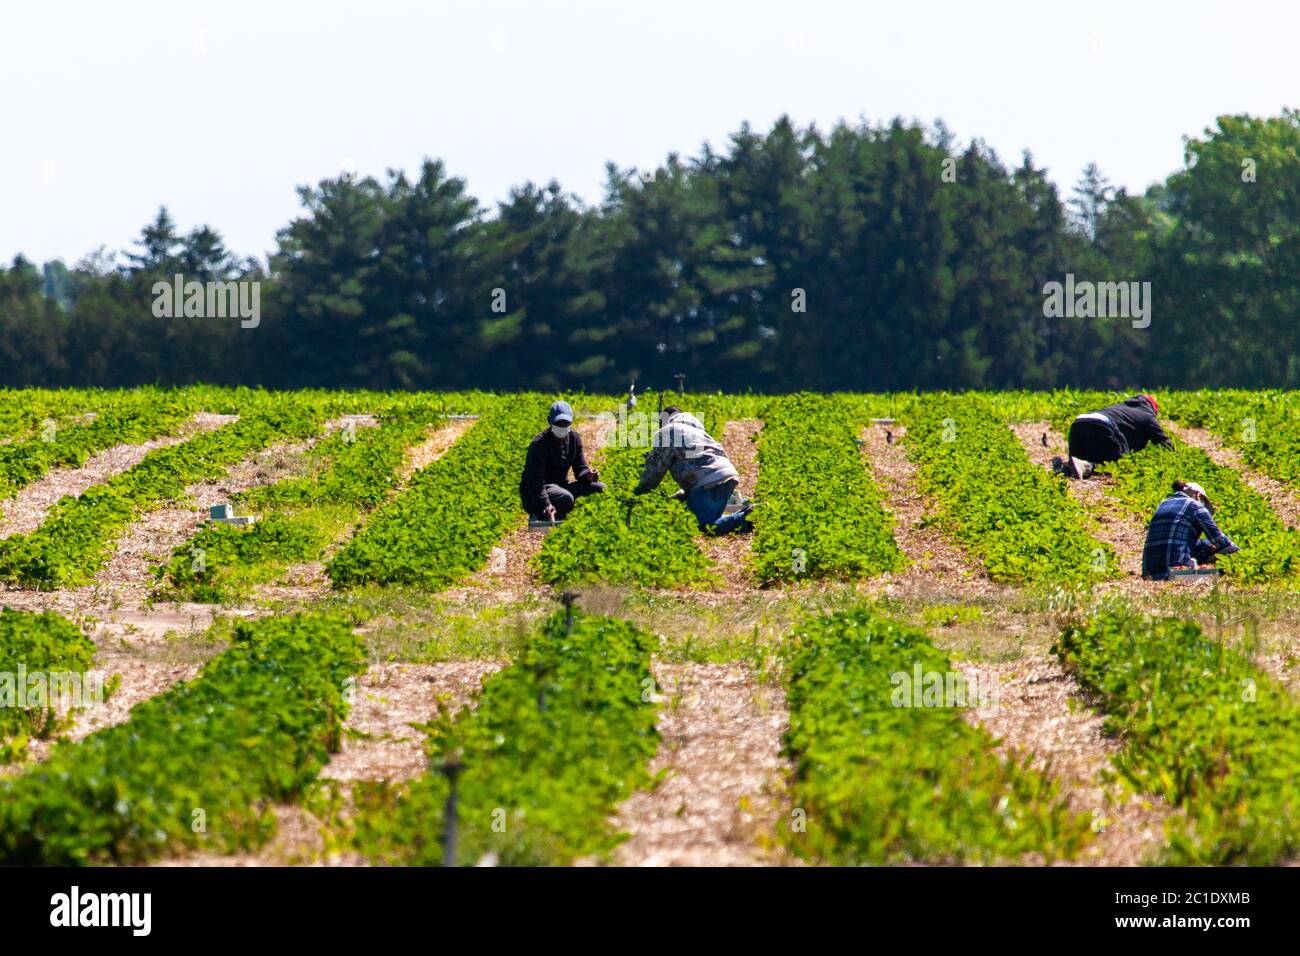 Talbotville, Canada - June 15, 2020. June in Southwestern Ontario means the start of Strawberry season. Farm workers and customers pick strawberries from an orchard in Southwestern Ontario. Mark Spowart/Alamy Live News Stock Photo